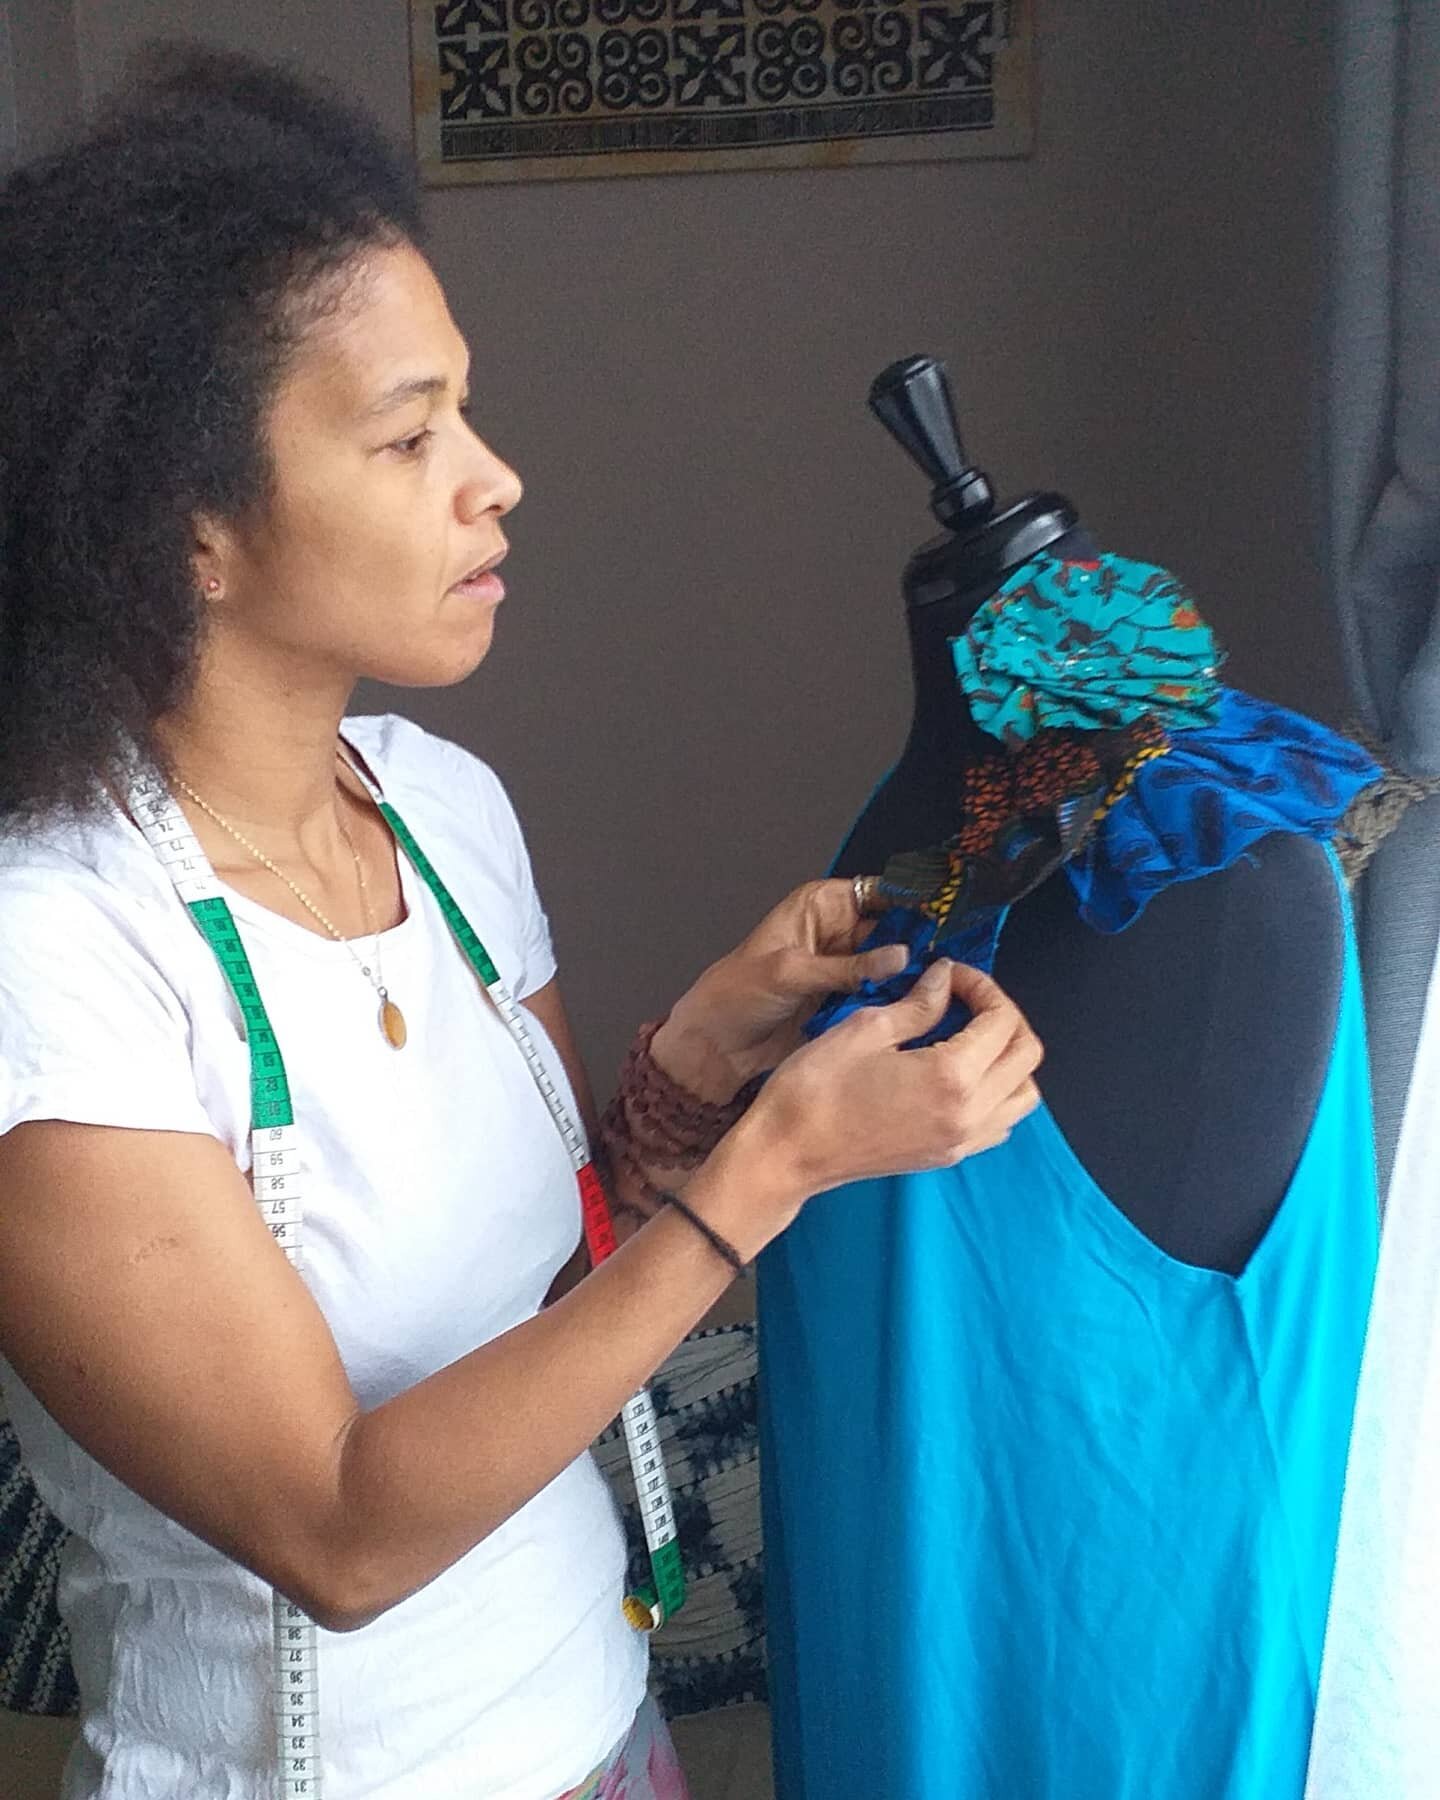 Handsewn final touches. The contract of using stretch cotton Jersey in a jumpsuit with non stretch African print flowers and  is a trial I played with on some T-shirts which have turned out well, loved the frayed edges. Colour play with blues, torqui